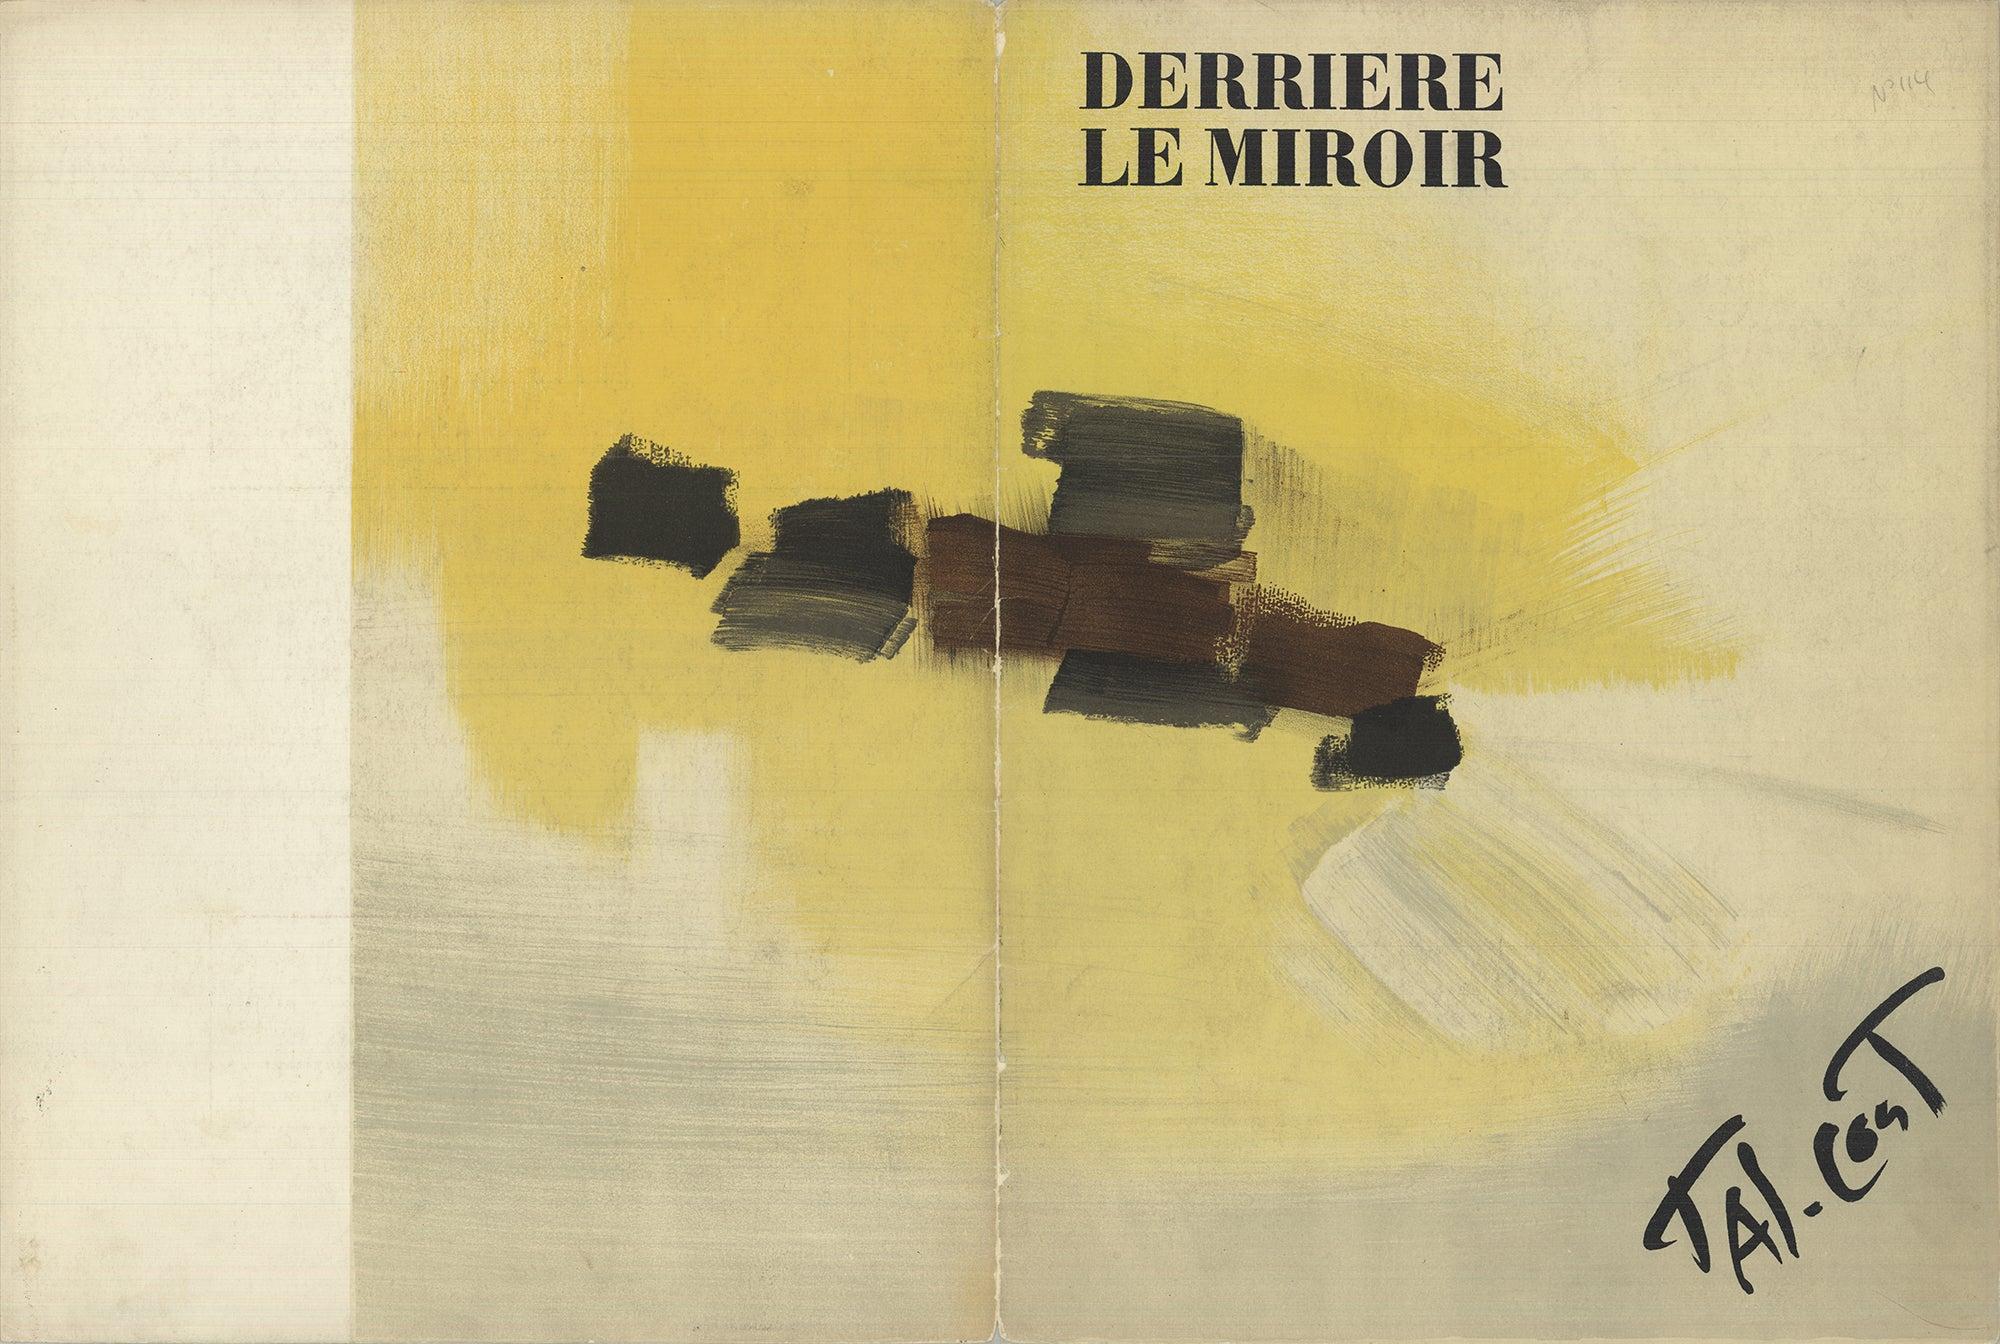 1959 Pierre Tal-Coat 'Derriere Le Miroir, no. 114 Cover' Abstract Yellow, Black 